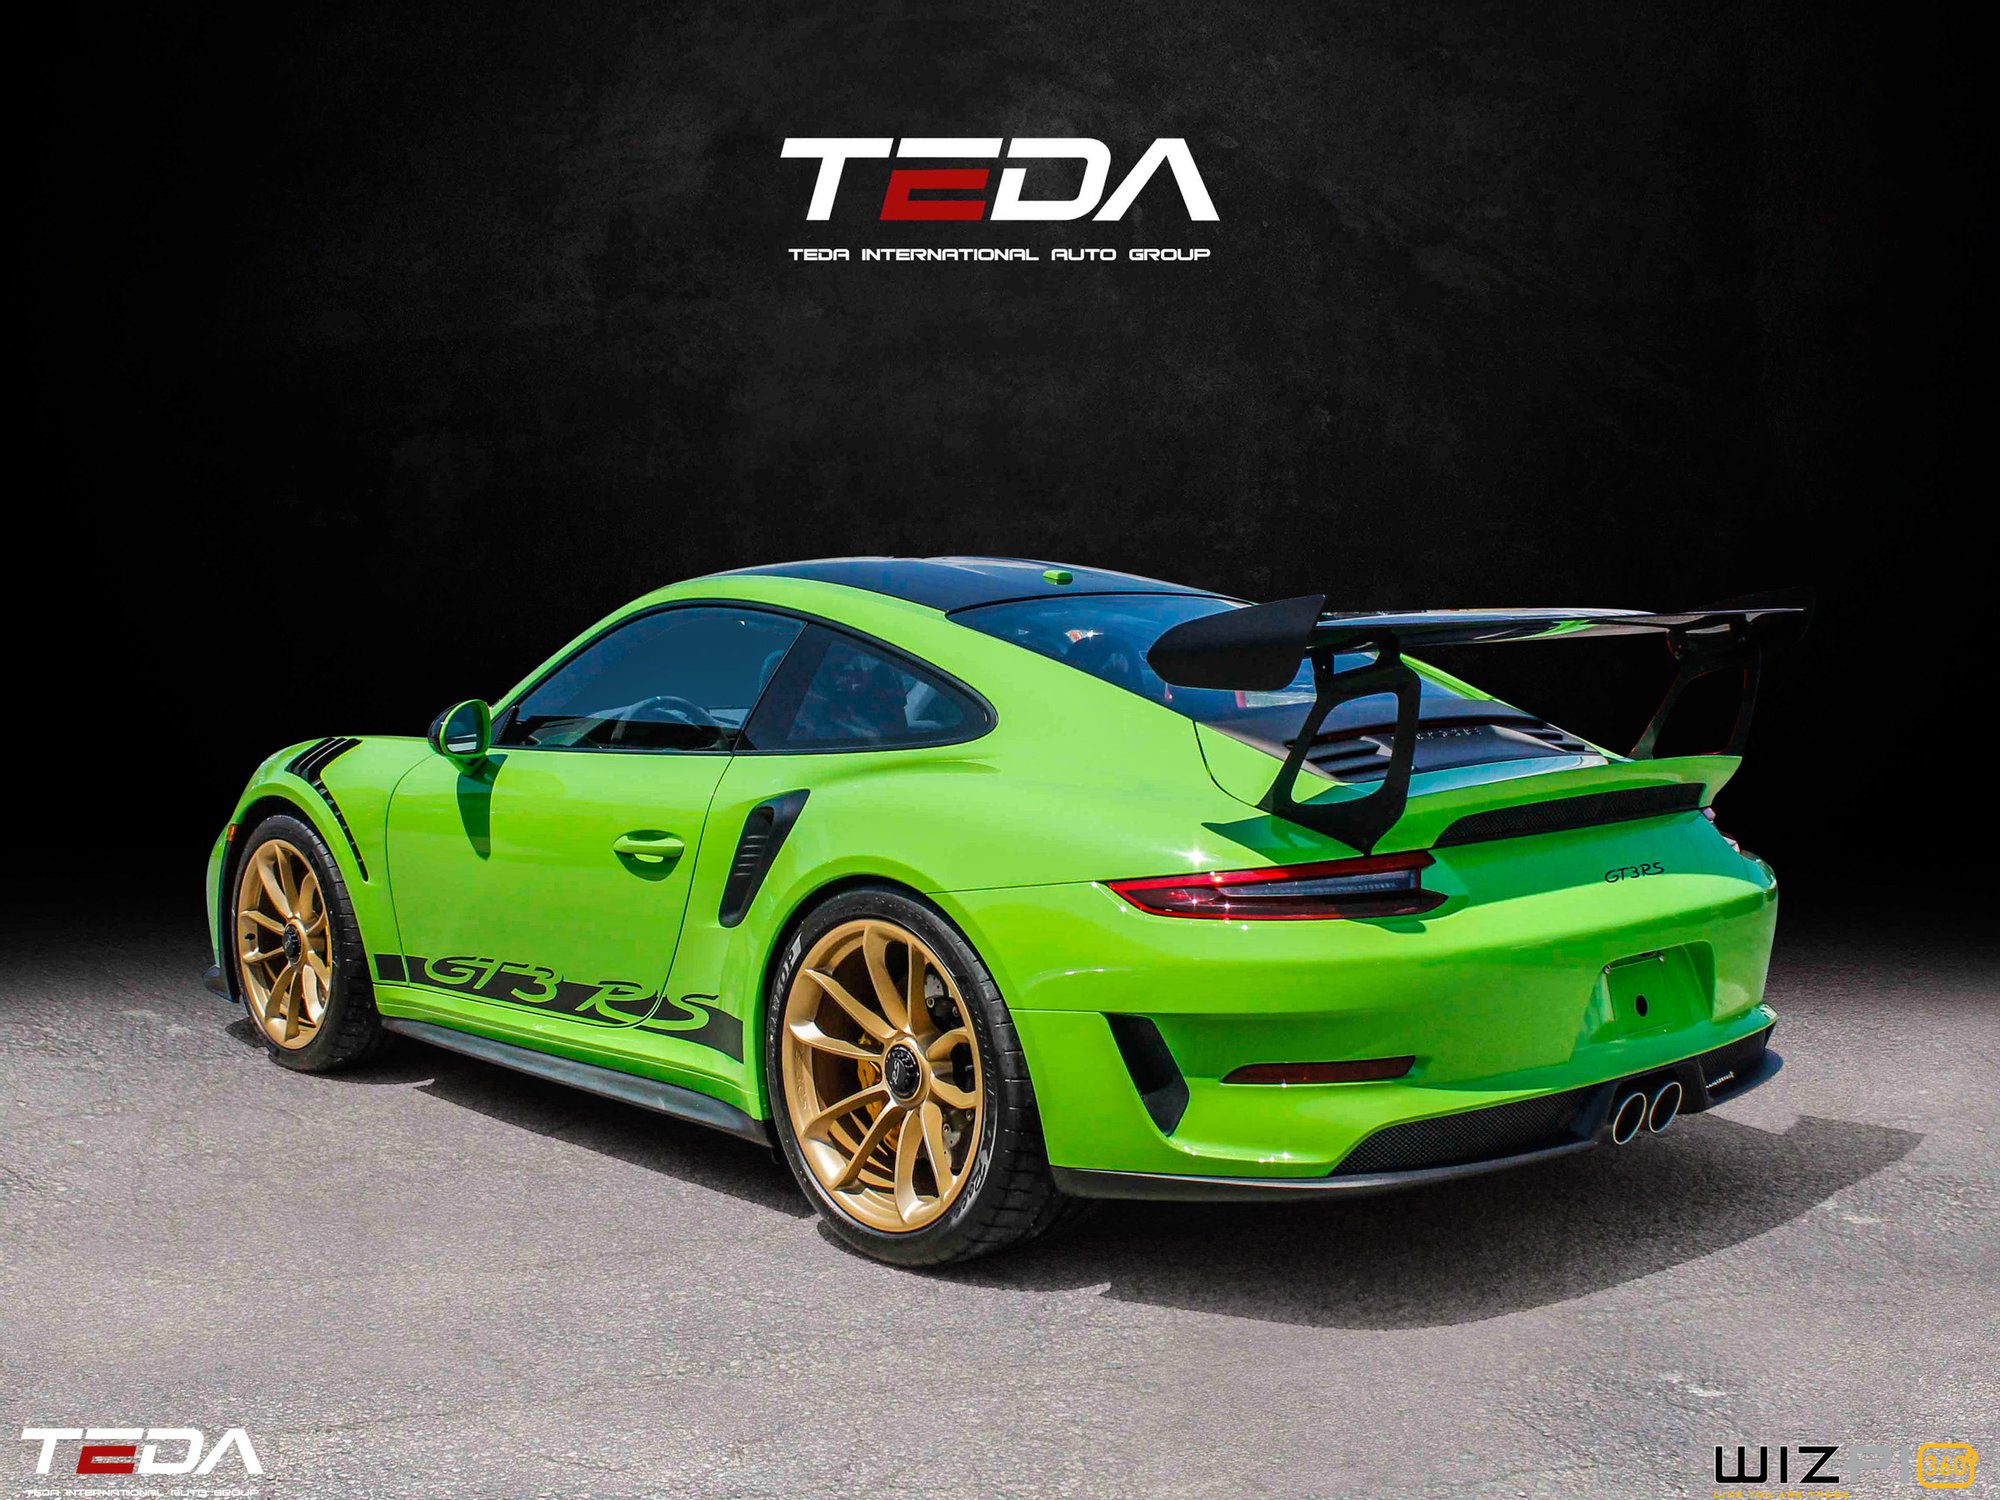 2019 Porsche 911 GT3 RS in Toronto, Canada for sale (10810413)